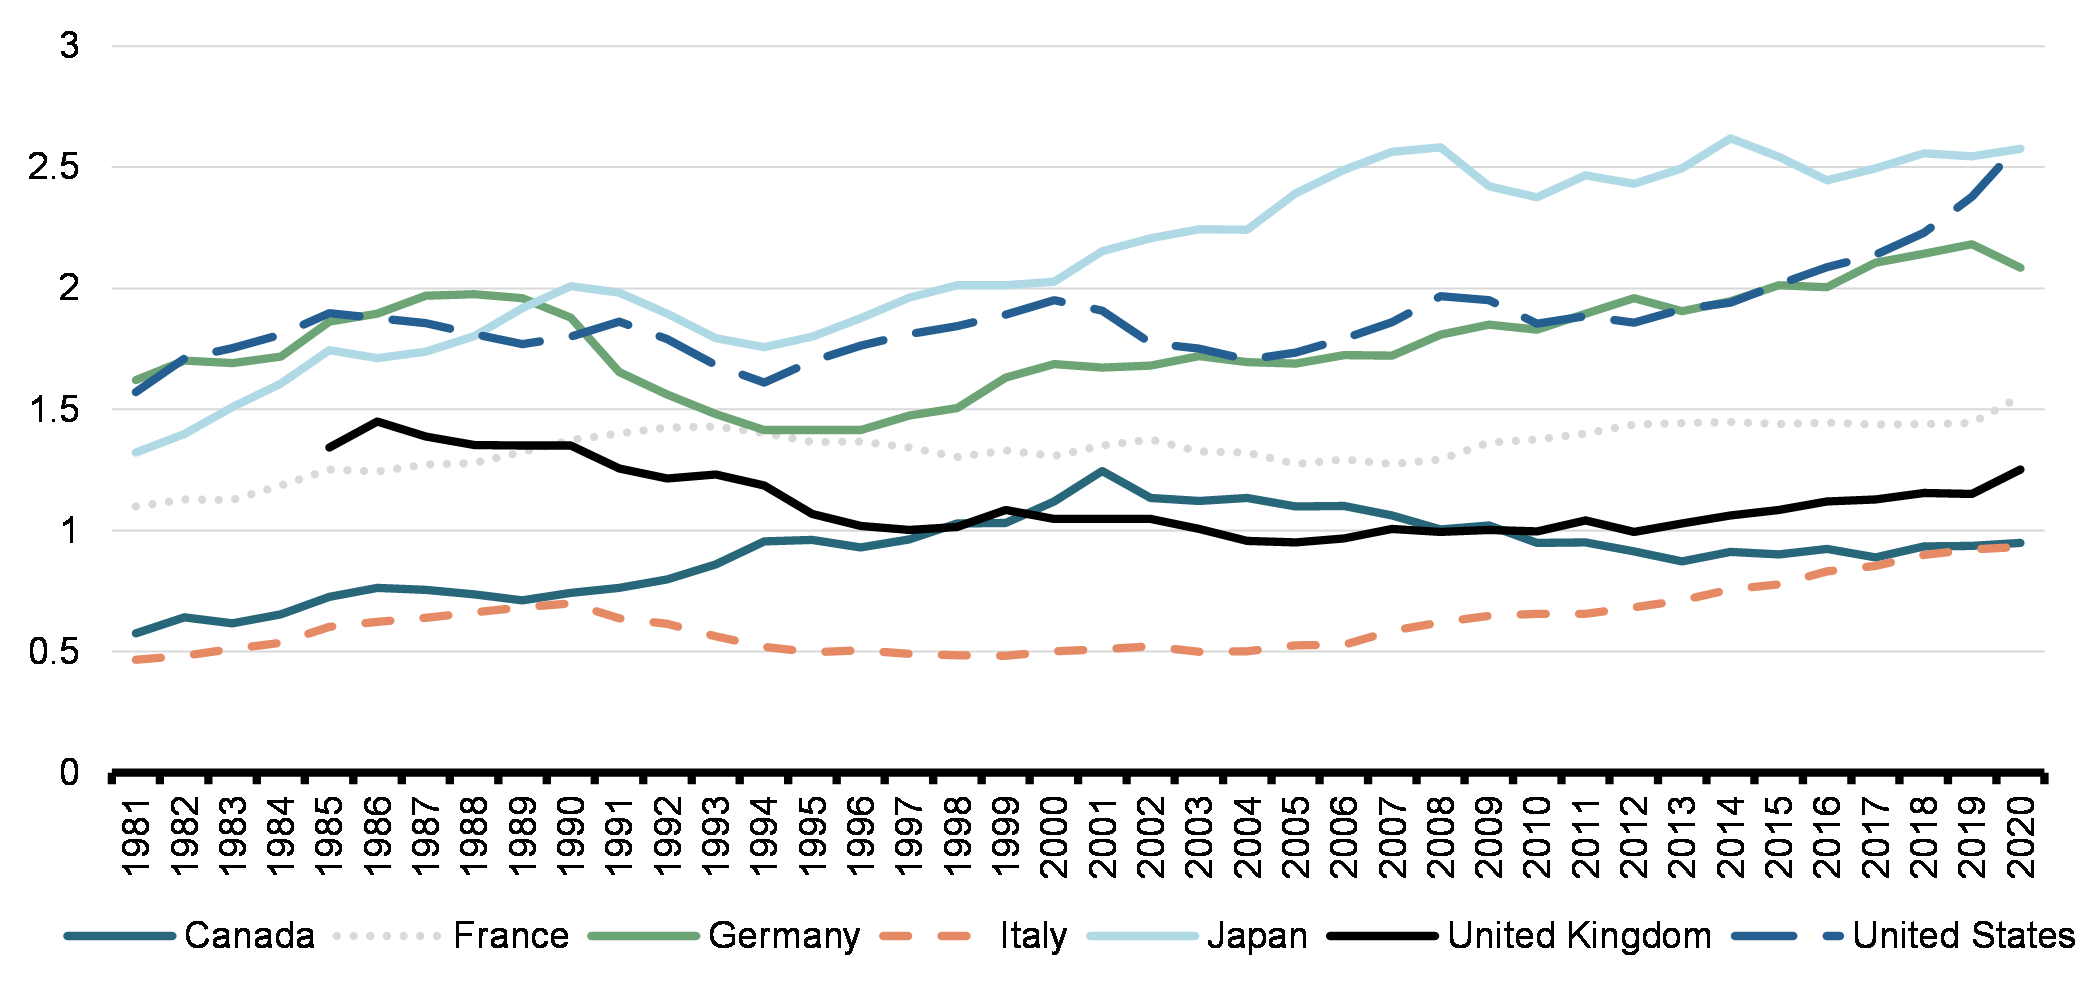 Chart 2: Business Expenditures on Research and Development (BERD) as a Percentage of GDP, Relative to Peer Countries